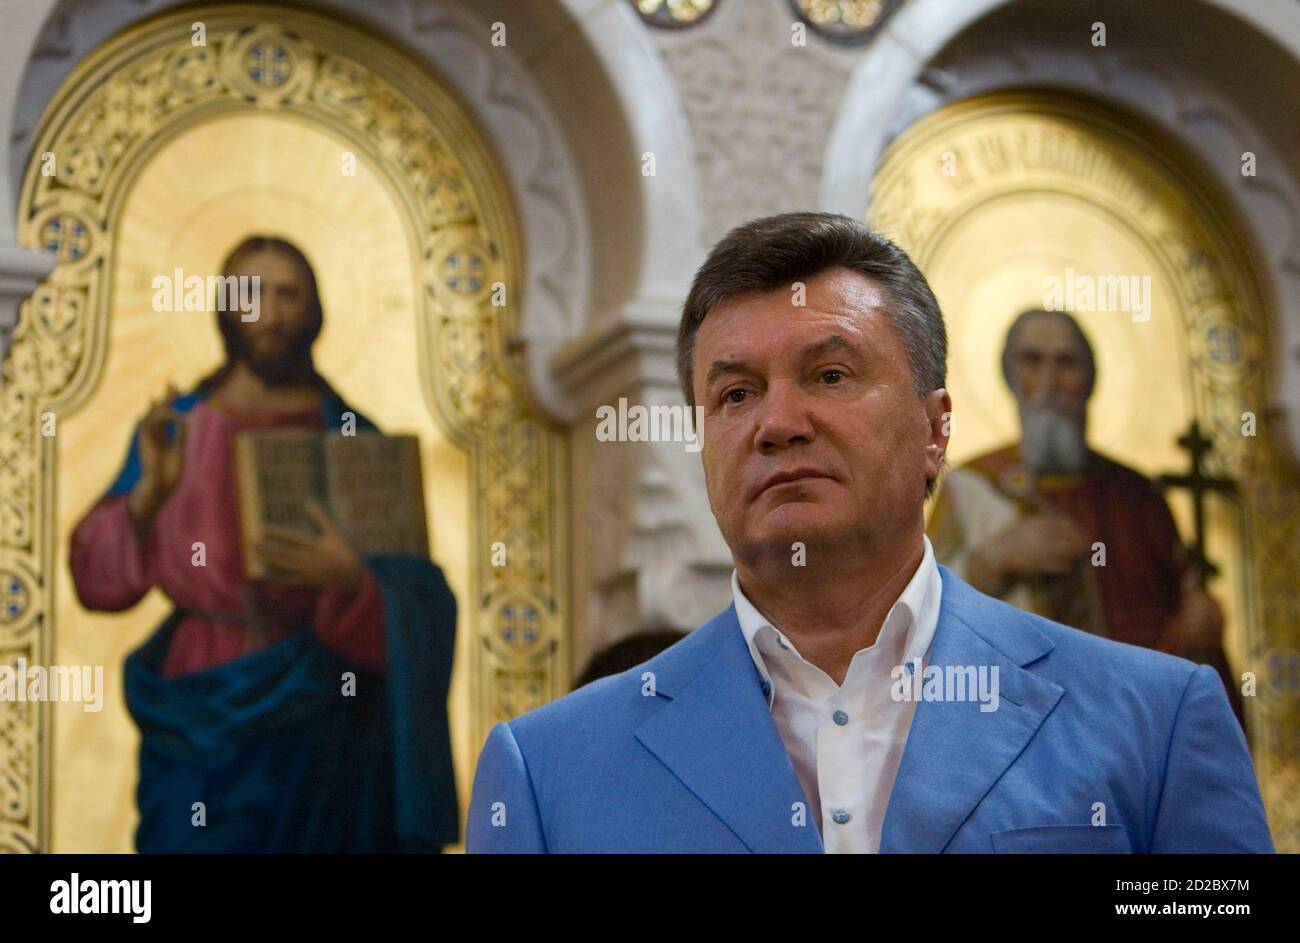 Ukraine's President Viktor Yanukovich attends a religious service marking his country's adoption of Christianity, in the town of Khersones, July 28, 2010. Ukraine and Russia today marked their official adoption of Christianity, which took place in Kiev, the capital of Kyivan Rus', by its grand prince Vladimir I in 988.  REUTERS/Mykhailo Markiv/Pool  (UKRAINE - Tags: HEADSHOT ANNIVERSARY POLITICS RELIGION) Stock Photo